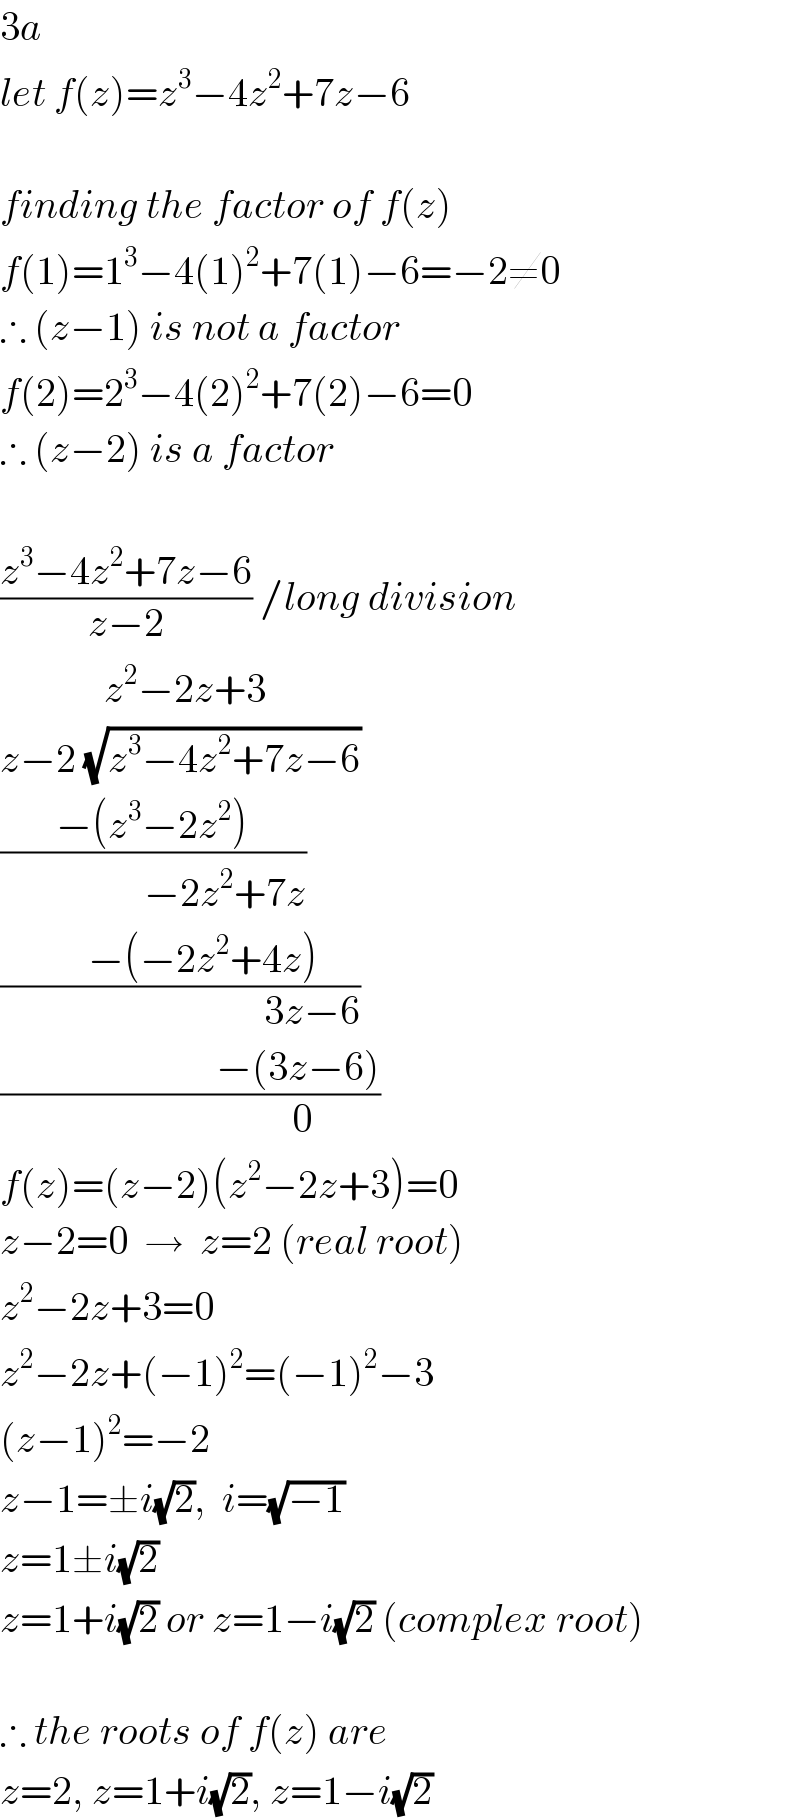 3a  let f(z)=z^3 −4z^2 +7z−6    finding the factor of f(z)  f(1)=1^3 −4(1)^2 +7(1)−6=−2≠0  ∴ (z−1) is not a factor  f(2)=2^3 −4(2)^2 +7(2)−6=0  ∴ (z−2) is a factor    ((z^3 −4z^2 +7z−6)/(z−2)) /long division               z^2 −2z+3  z−2 (√(z^3 −4z^2 +7z−6))  ((−(z^3 −2z^2 ))/(                  −2z^2 +7z))  ((      −(−2z^2 +4z))/(                                 3z−6))  ((                           −(3z−6))/(                            0))  f(z)=(z−2)(z^2 −2z+3)=0  z−2=0  →  z=2 (real root)  z^2 −2z+3=0  z^2 −2z+(−1)^2 =(−1)^2 −3  (z−1)^2 =−2  z−1=±i(√2),  i=(√(−1))  z=1±i(√2)  z=1+i(√2) or z=1−i(√2) (complex root)    ∴ the roots of f(z) are   z=2, z=1+i(√2), z=1−i(√2)  